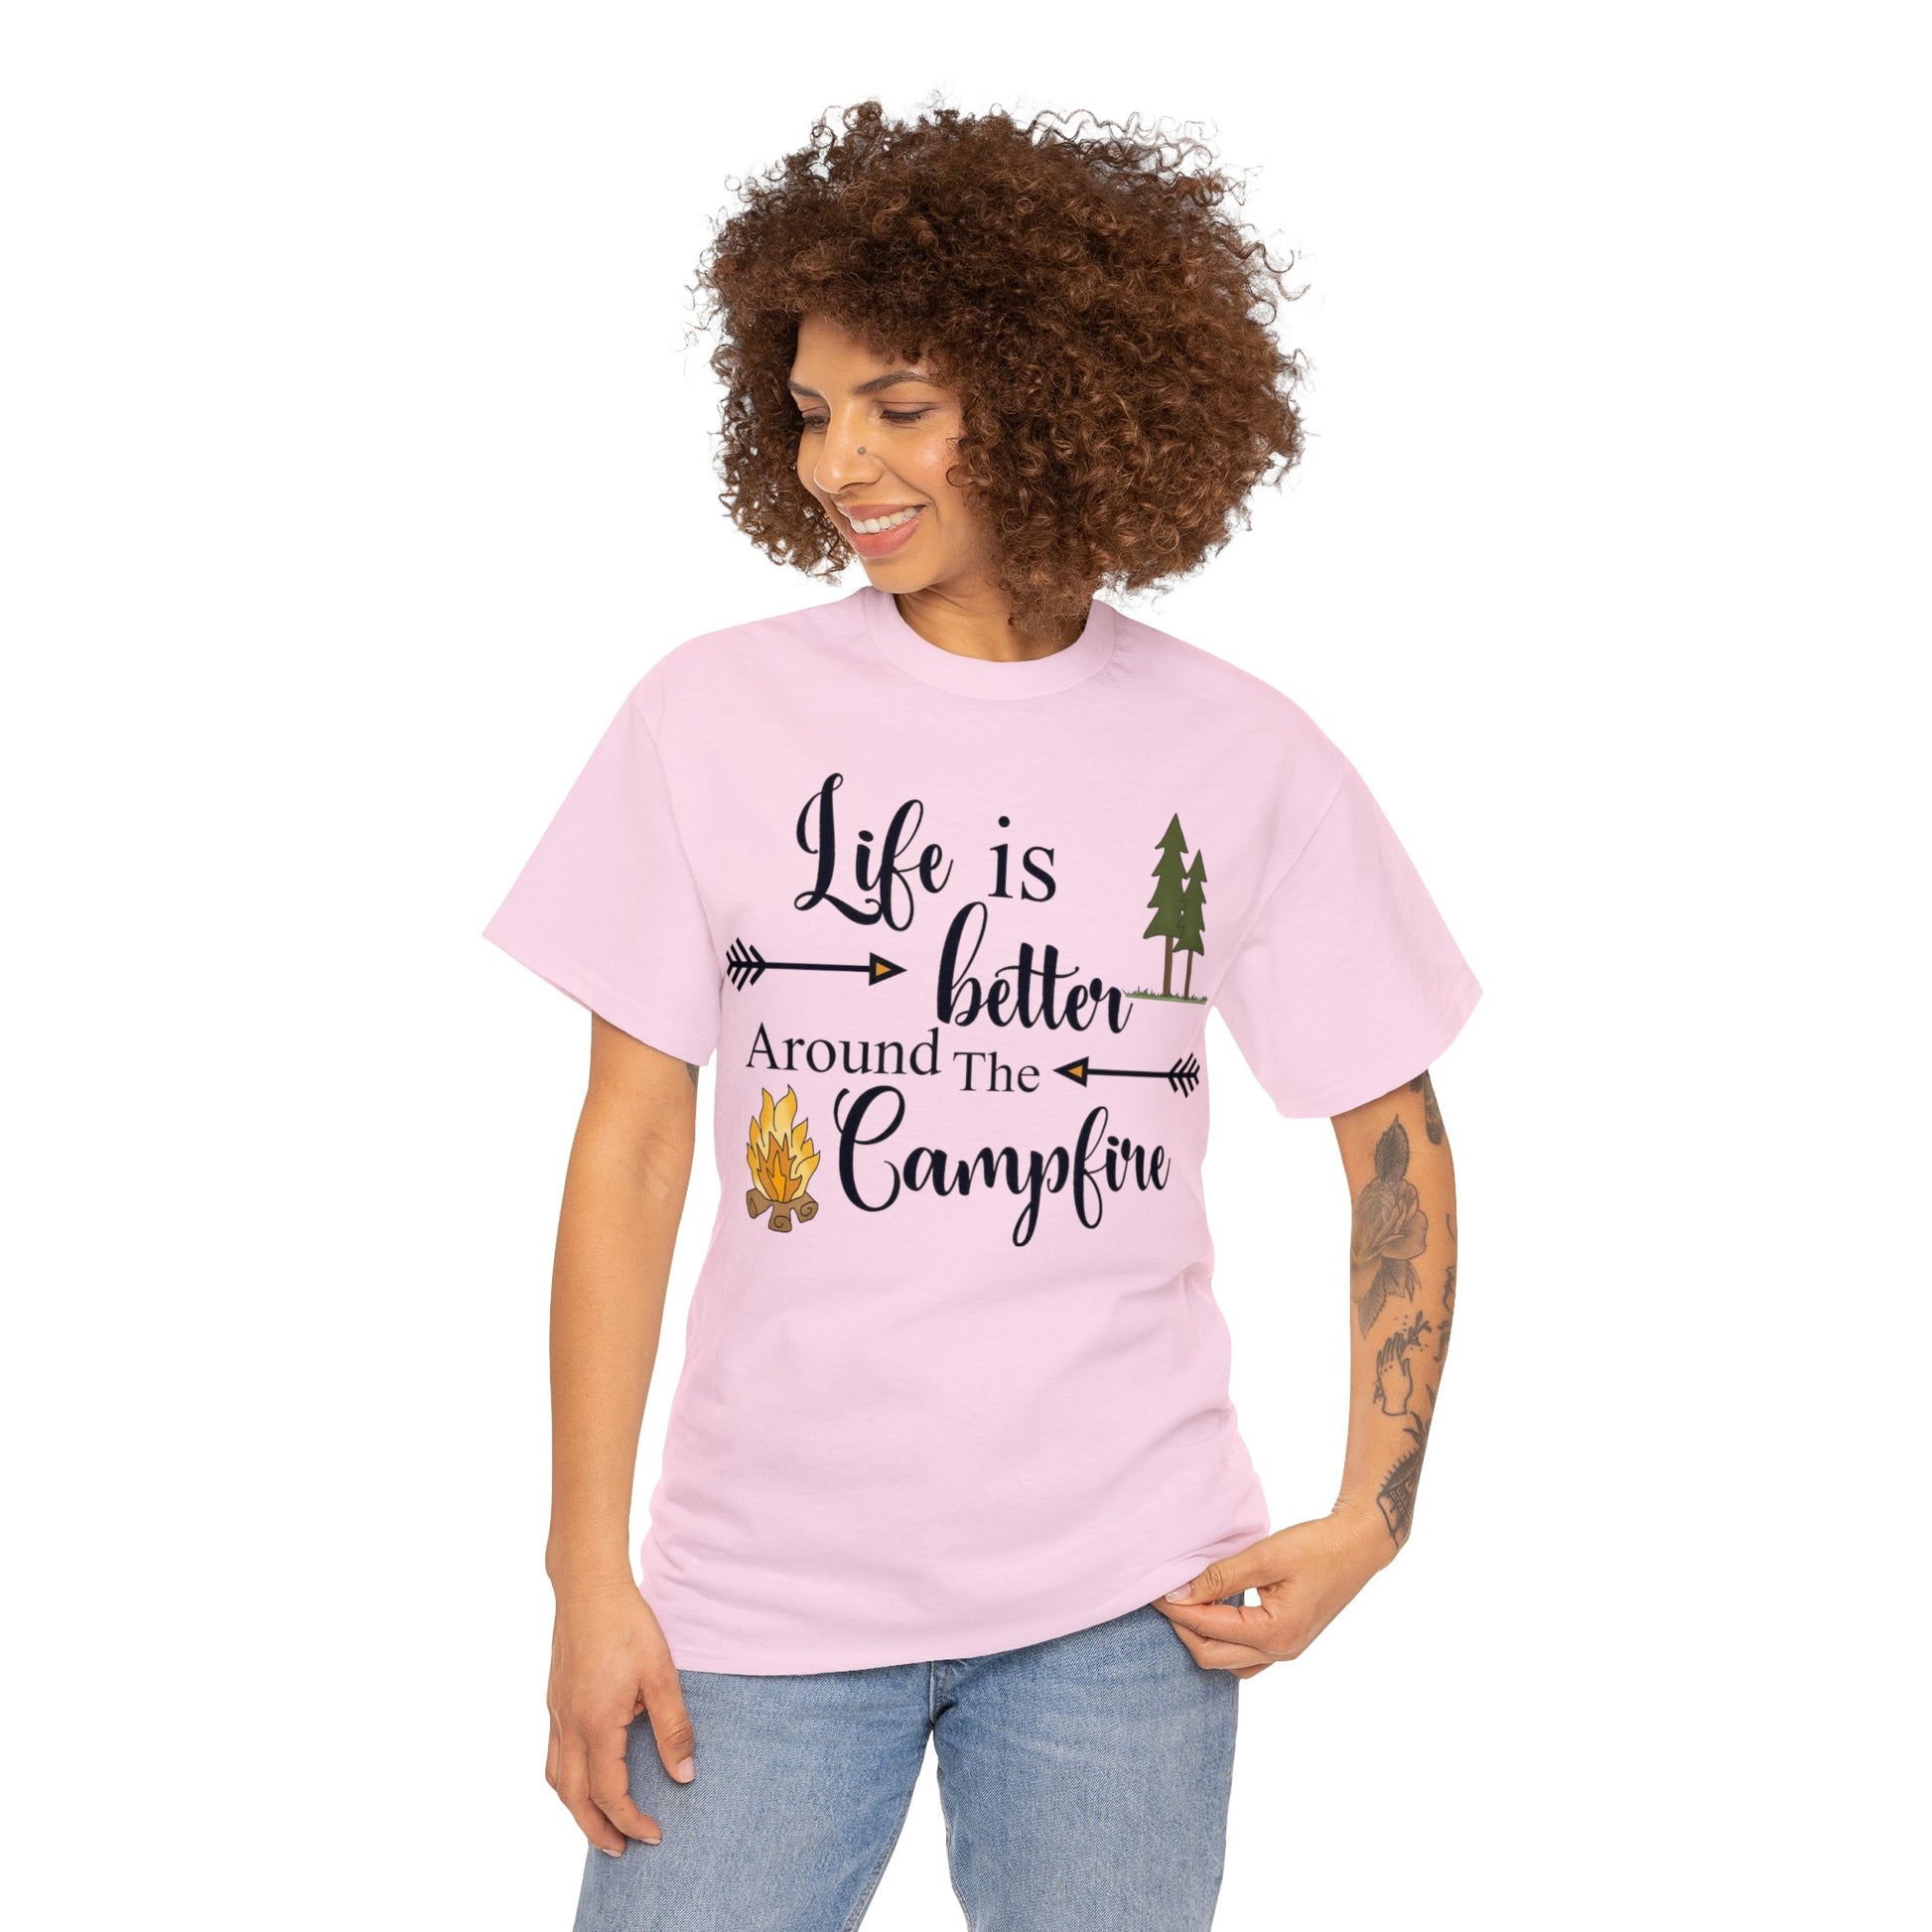 Take a break from the daily grind and embrace the great outdoors with our "Life Is Better Around The Campfire" tee. Made from heavy cotton, this shirt is perfect for your camping adventures. Its playful message will remind you to enjoy life's simple pleasures (like s'mores) around the fire.